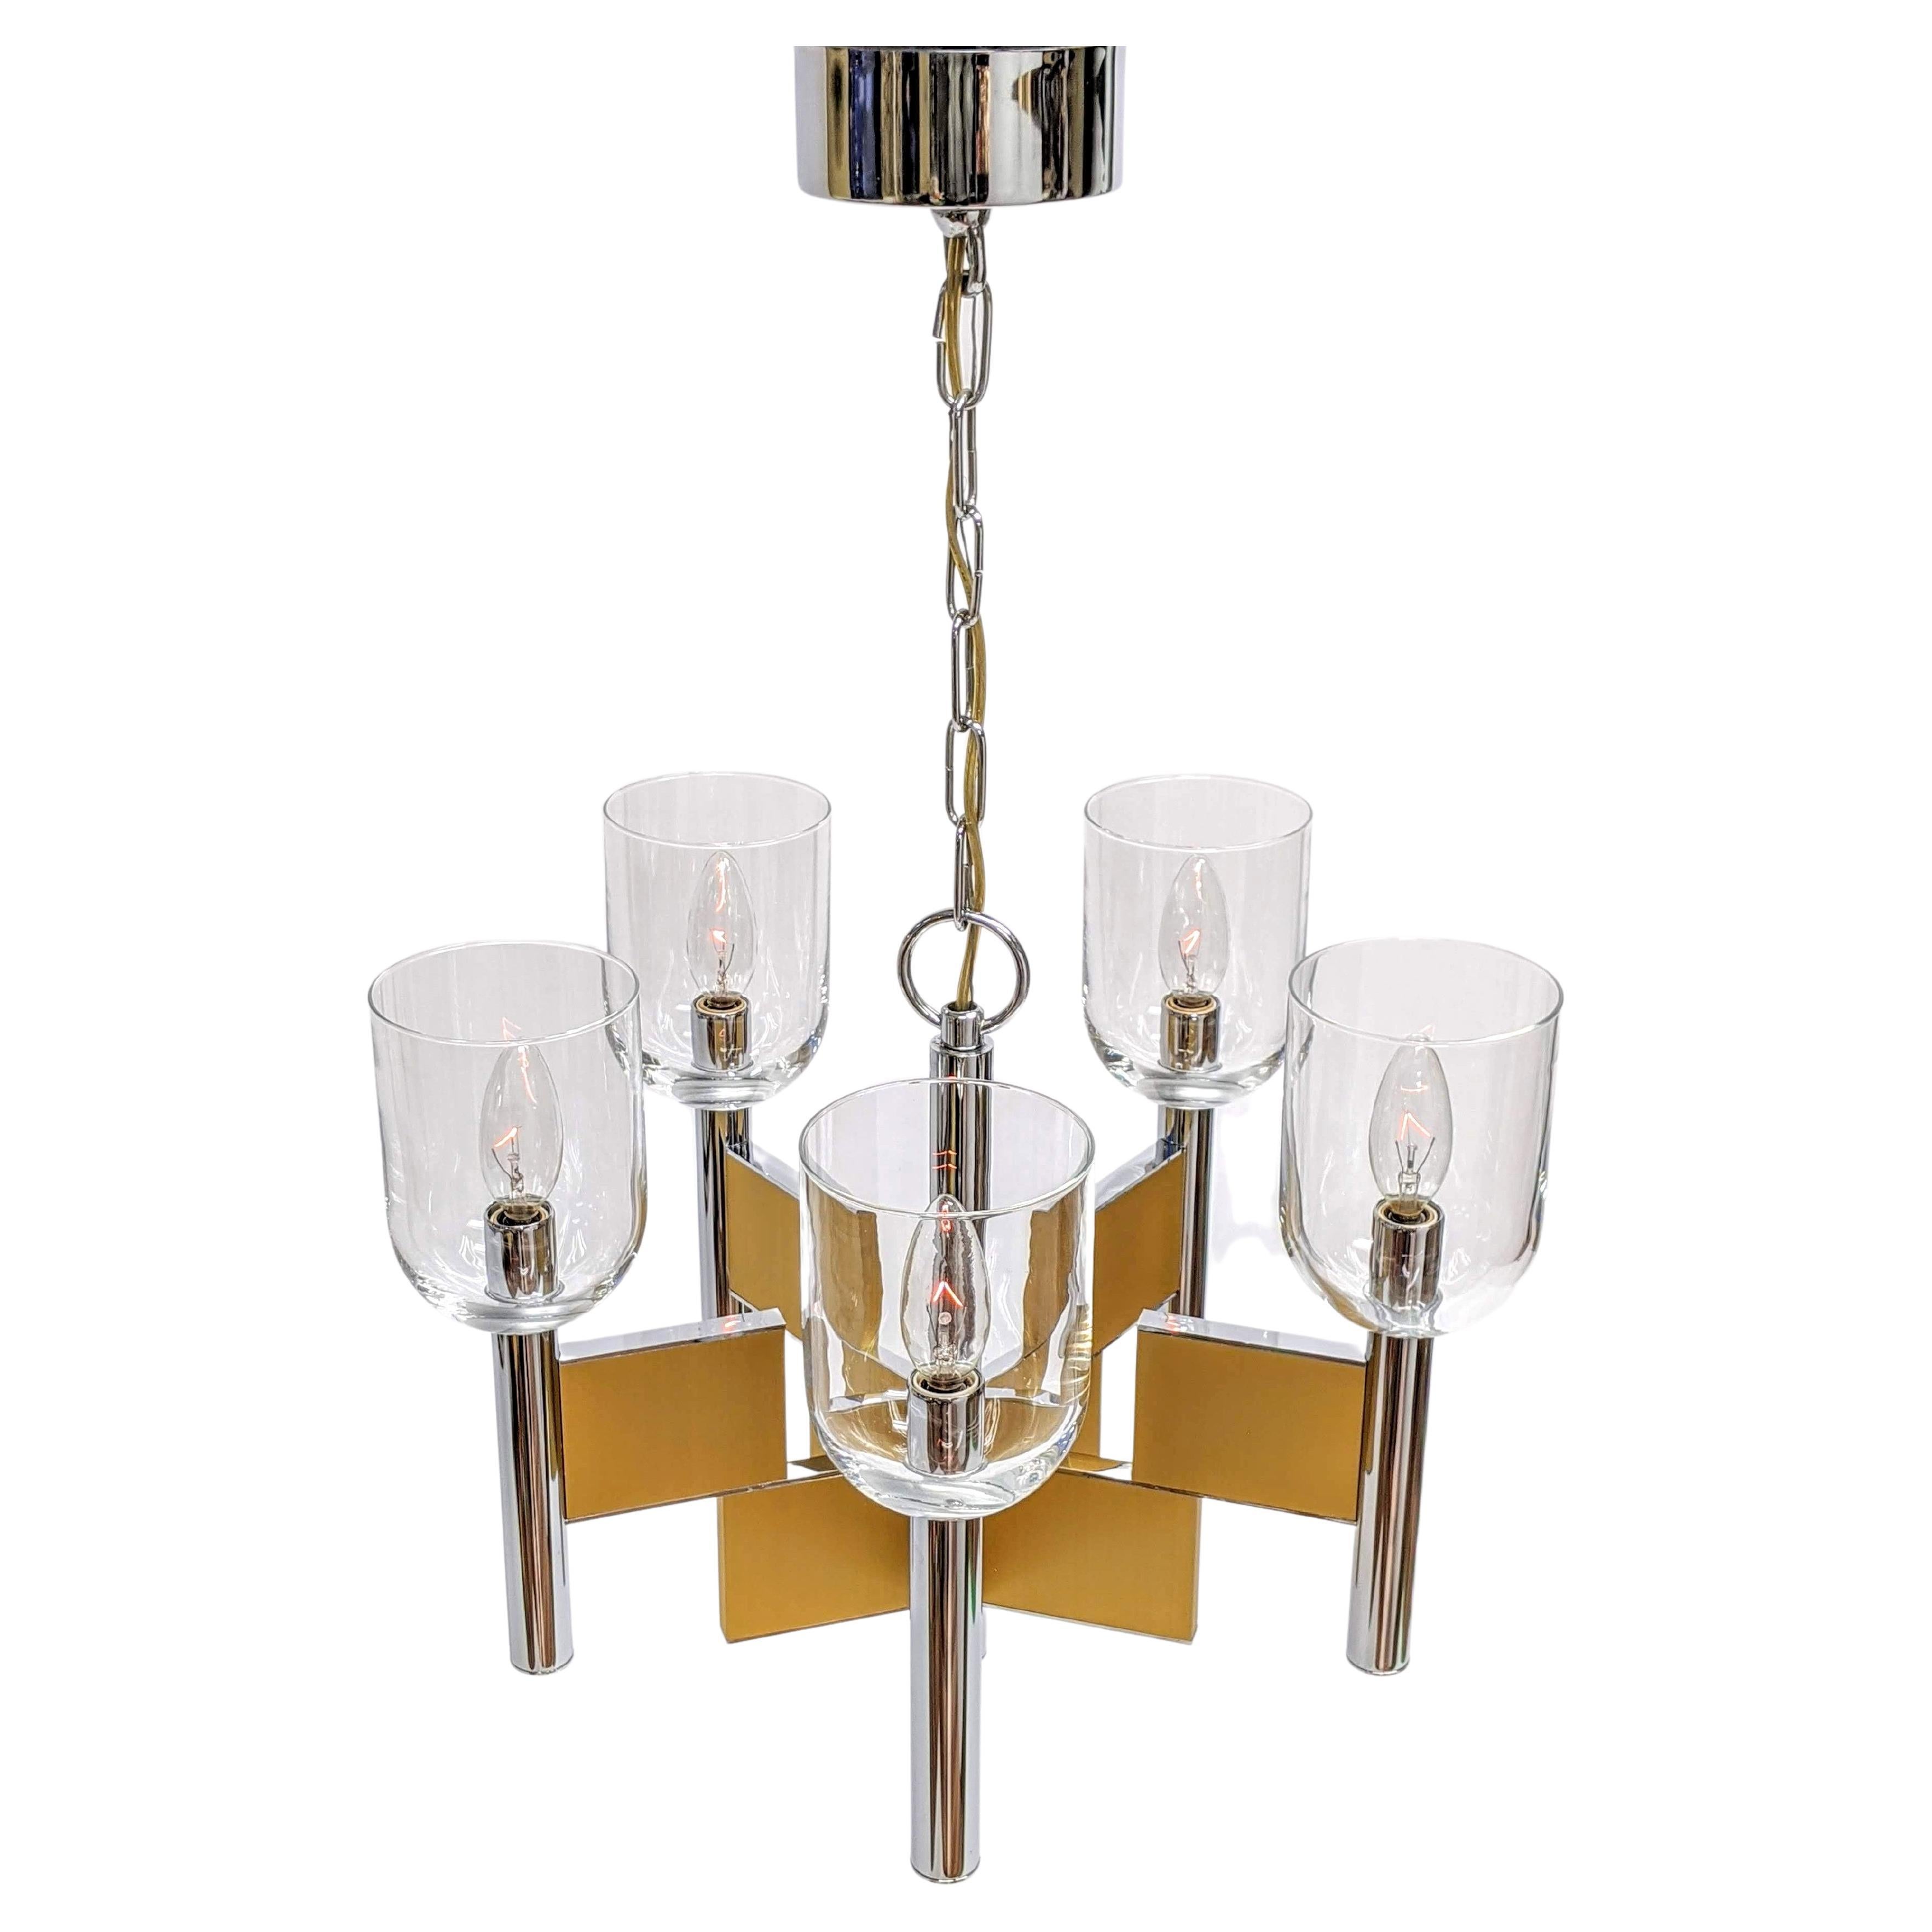 Mouth blowed glass hurricane chandelier made of thick chromed steel and brass.

Prime quality material, solid construction.

Chandelier measure 17 in. wide by 13 in. high.

Chain lenght with canopy 13 in. high. Could be ajusted. 

5 E12 candelabra